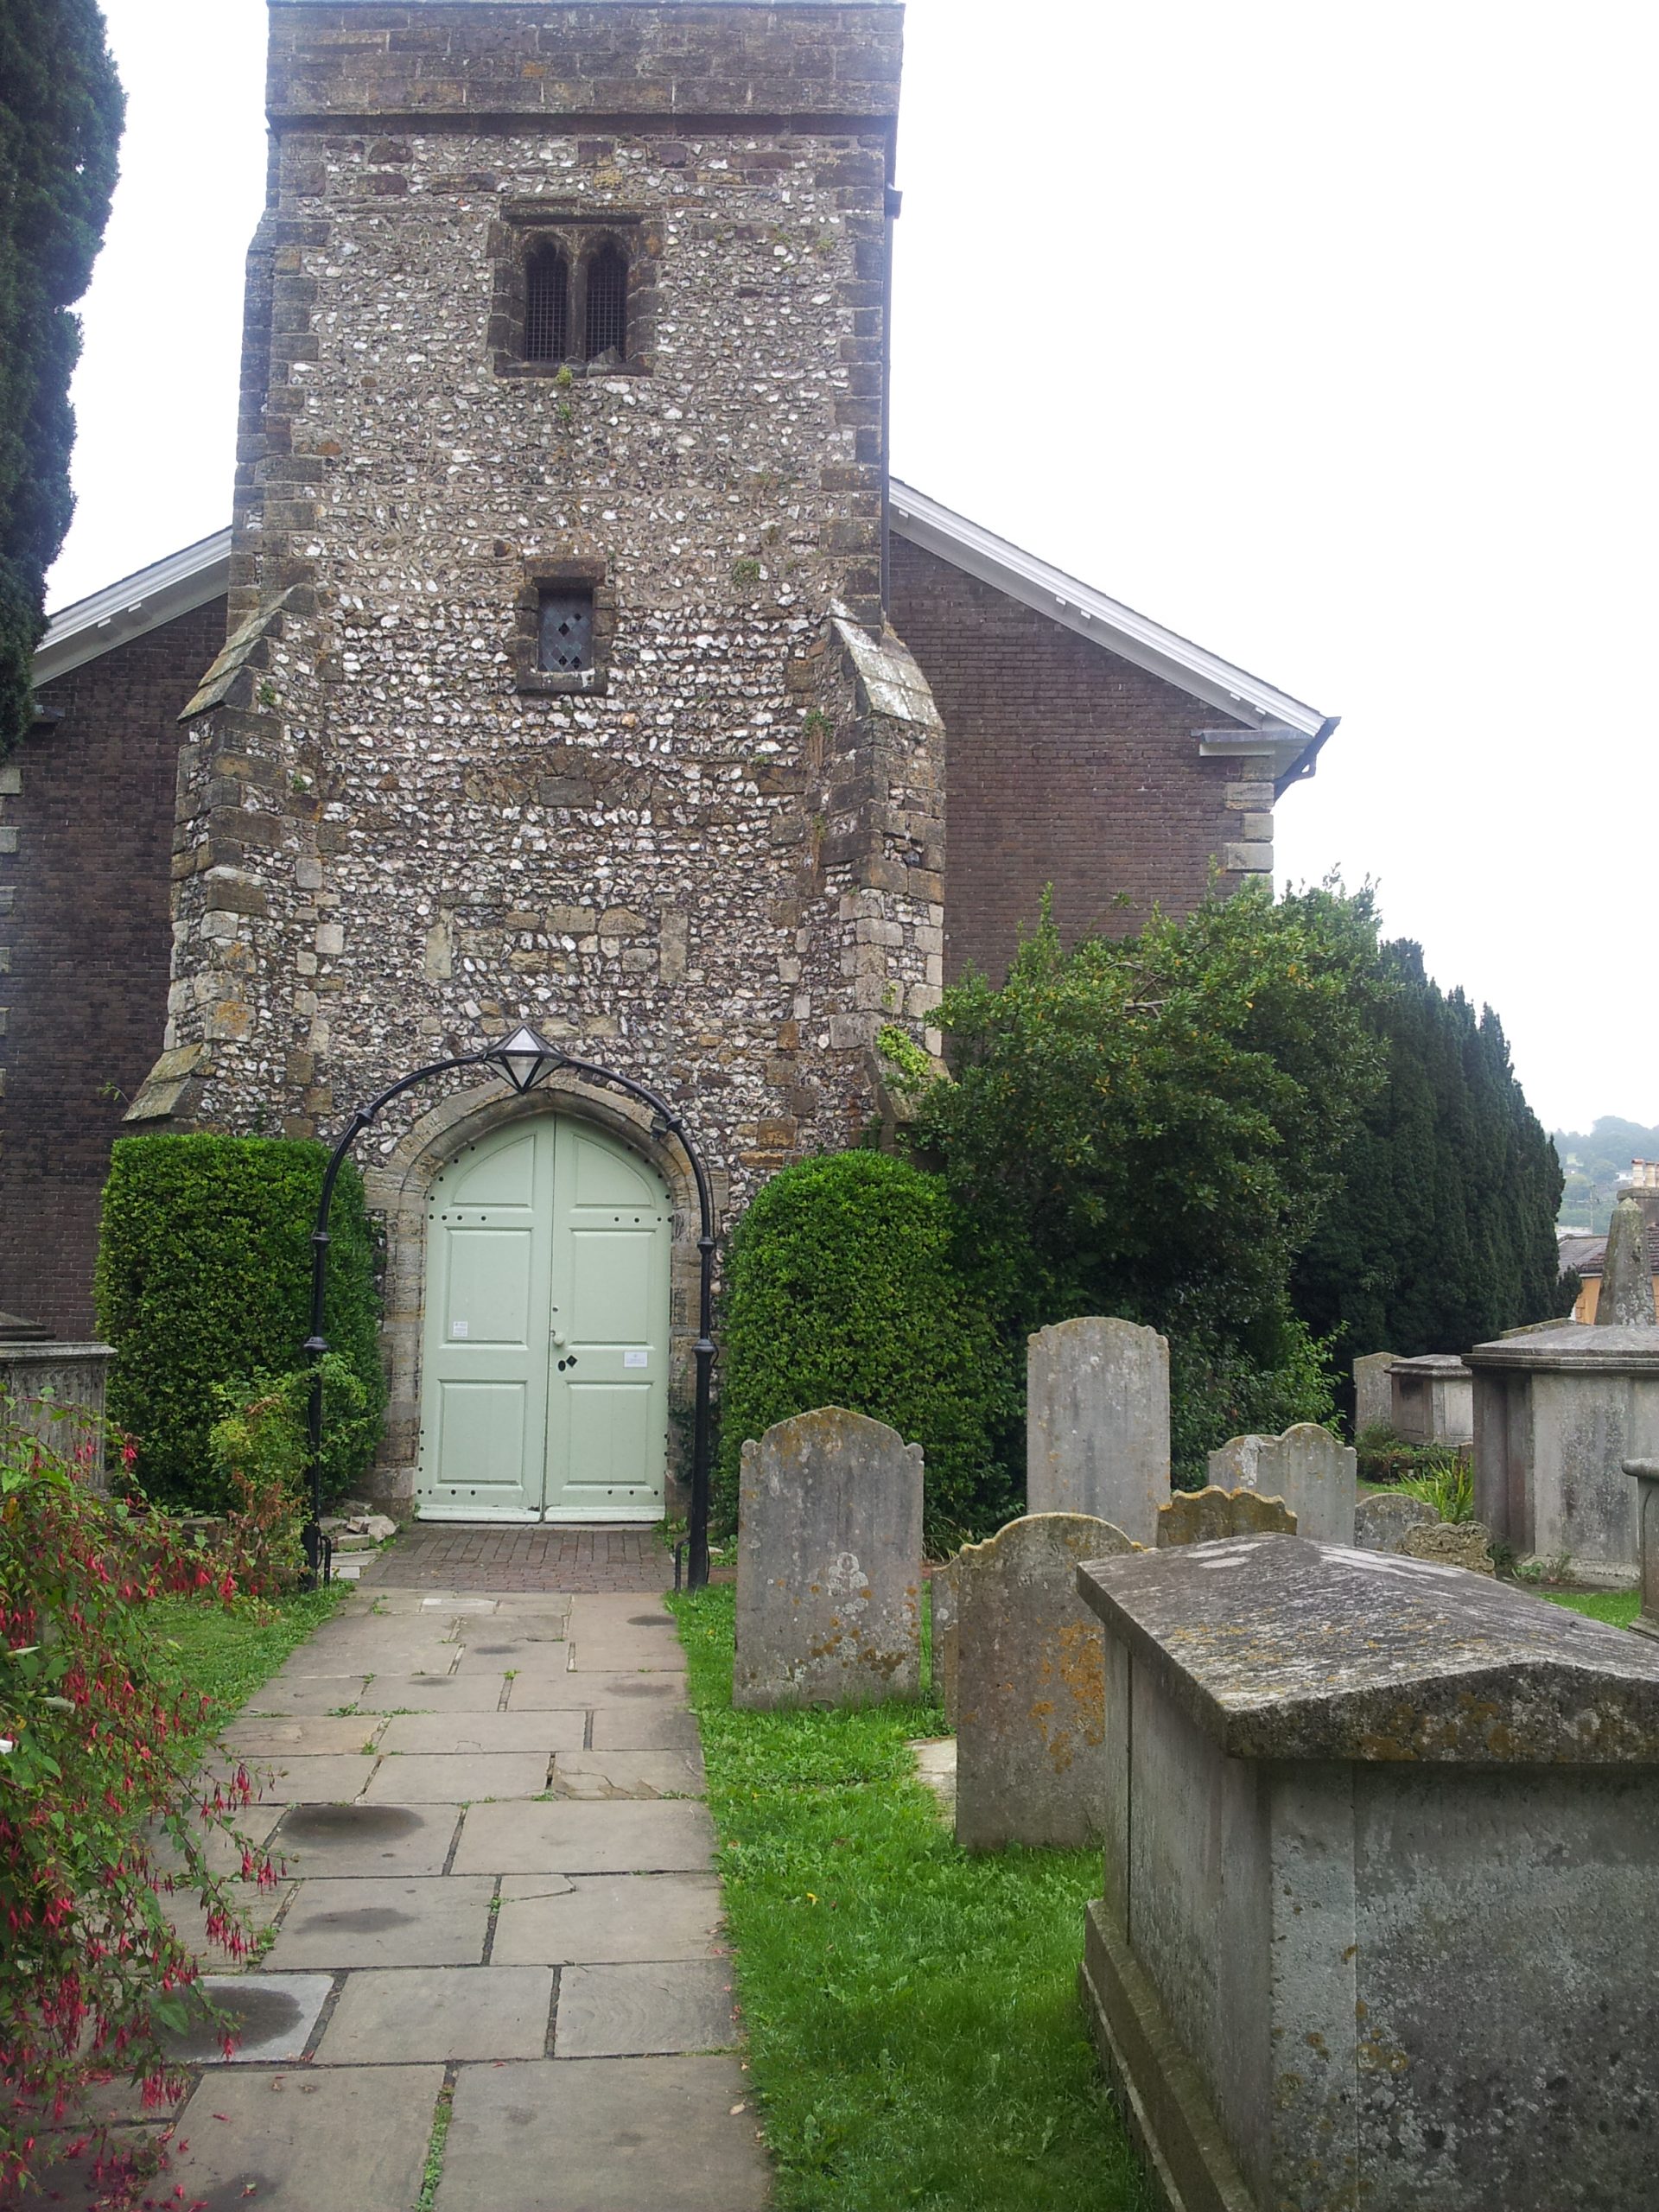 The All Saints Centre in Lewes